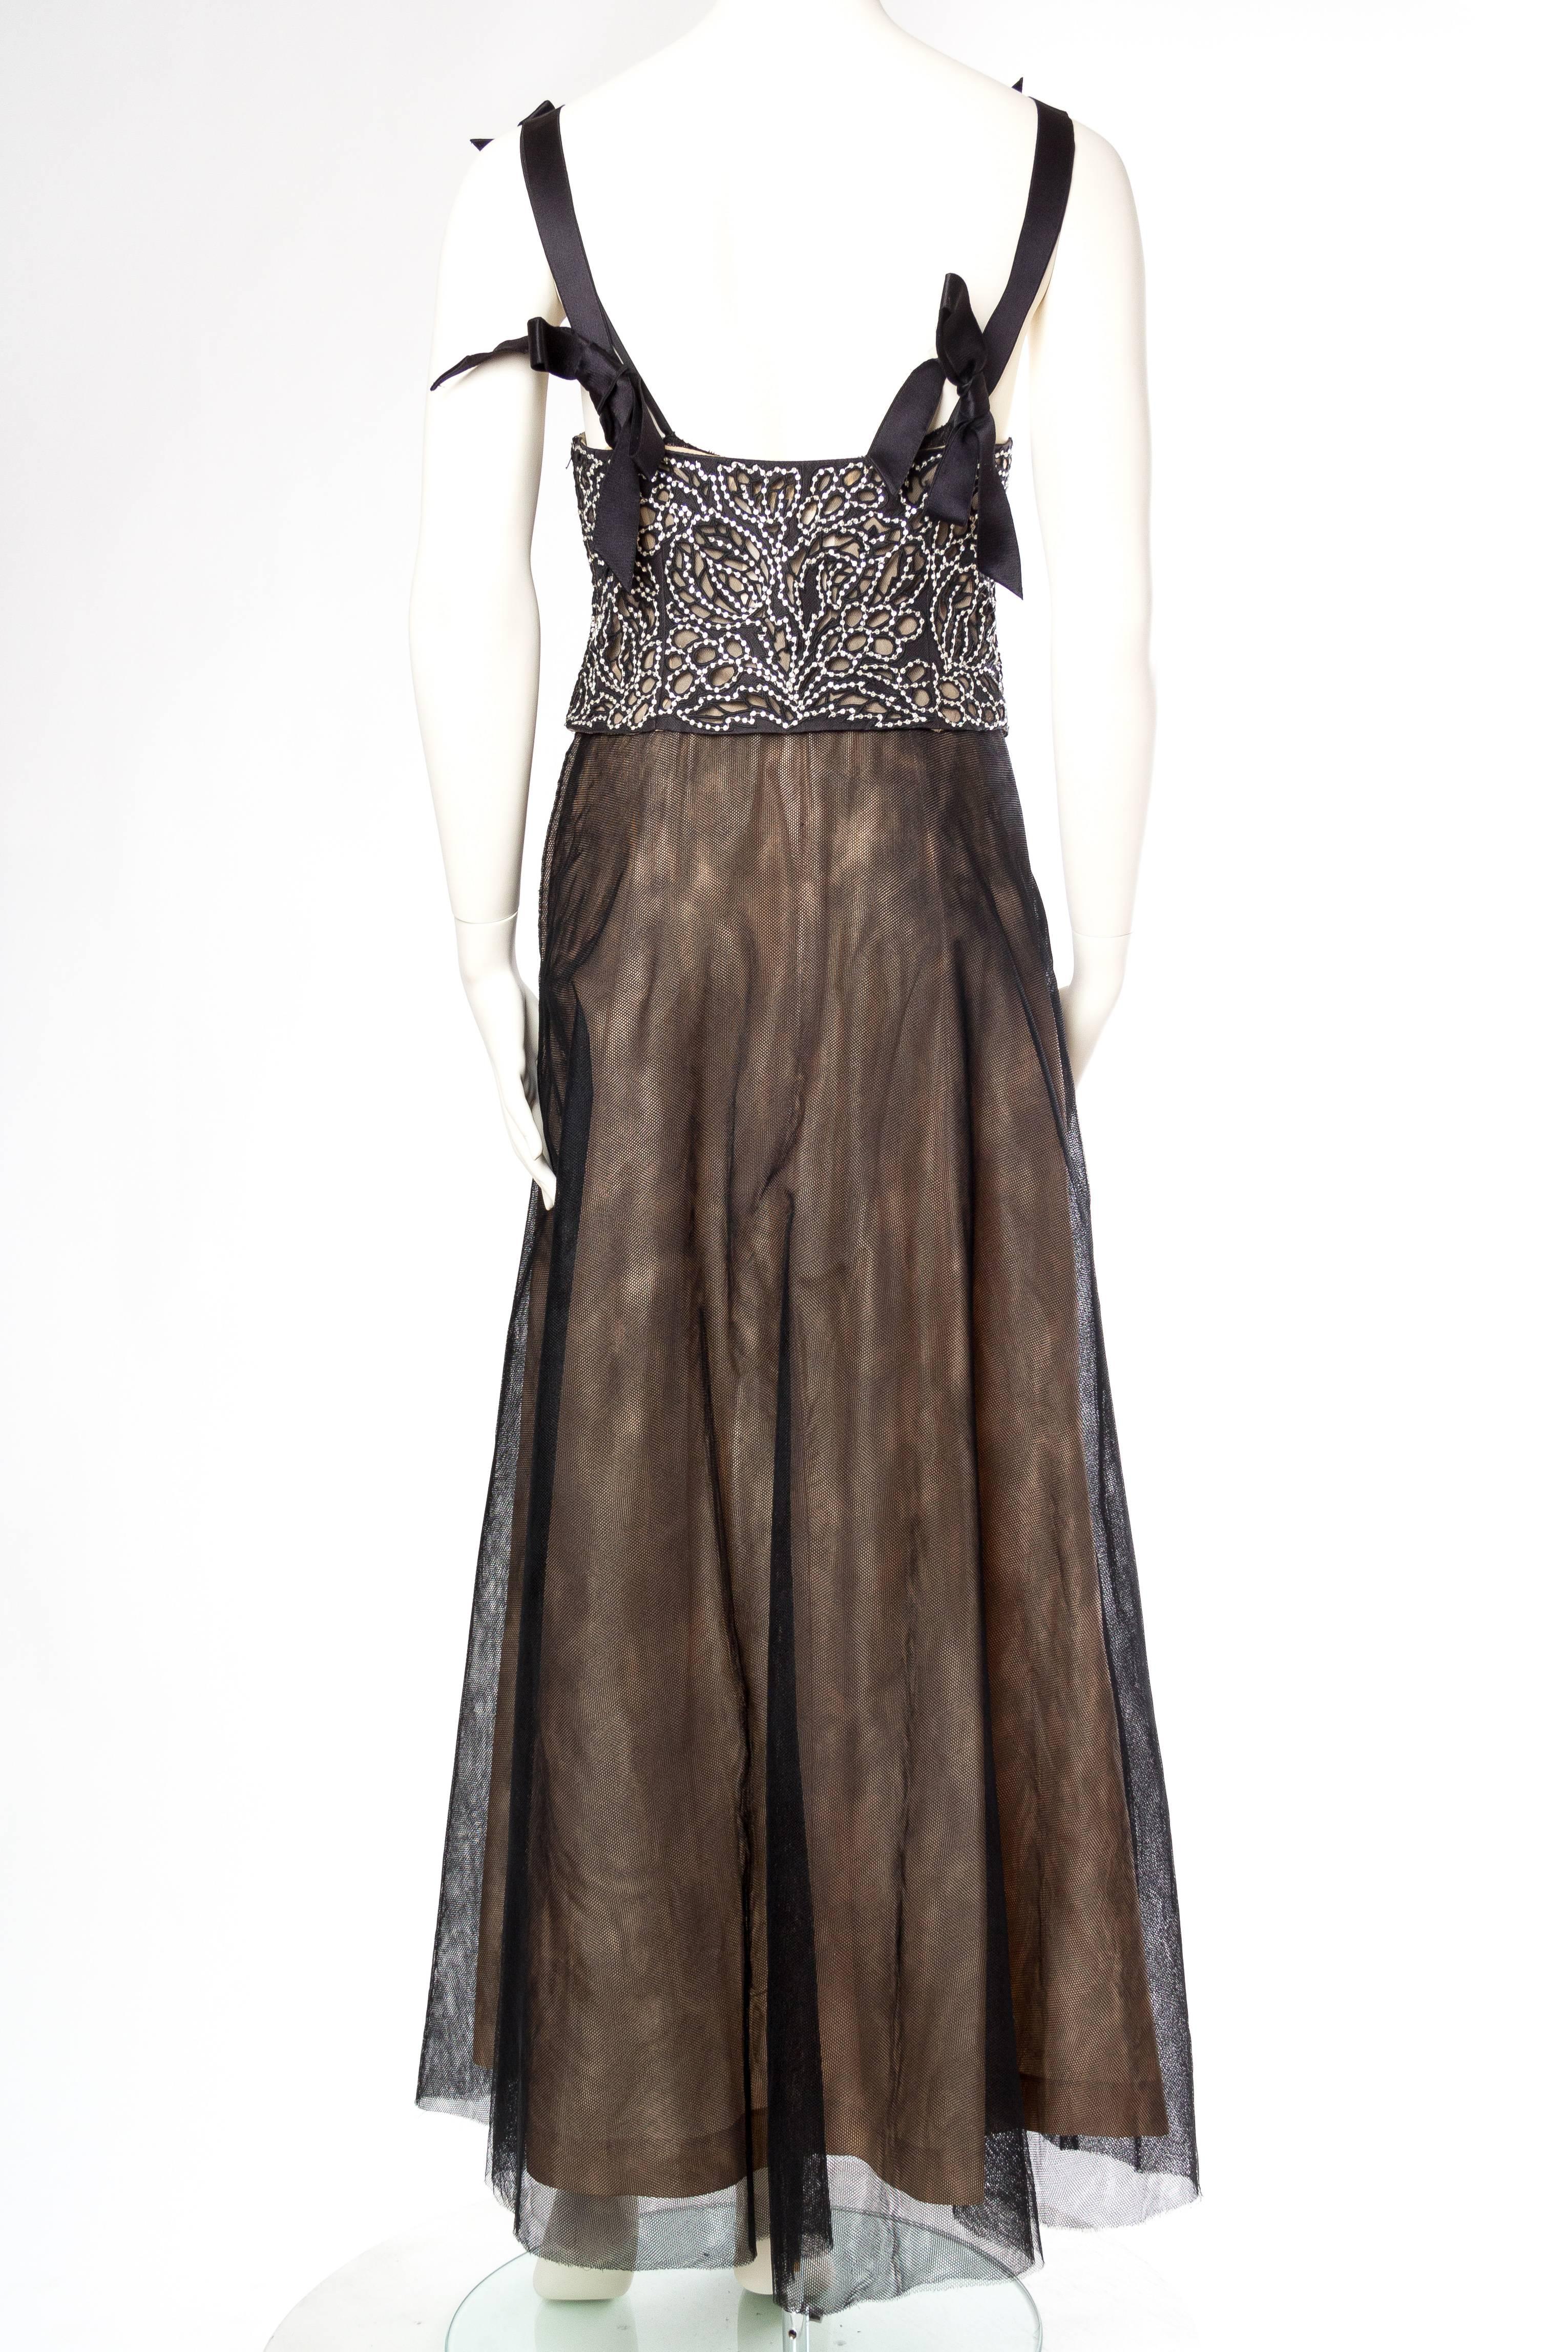 1980 VALENTINO Black Silk Tulle Couture Quality Gown With Lace And Crystal Bodi For Sale 4